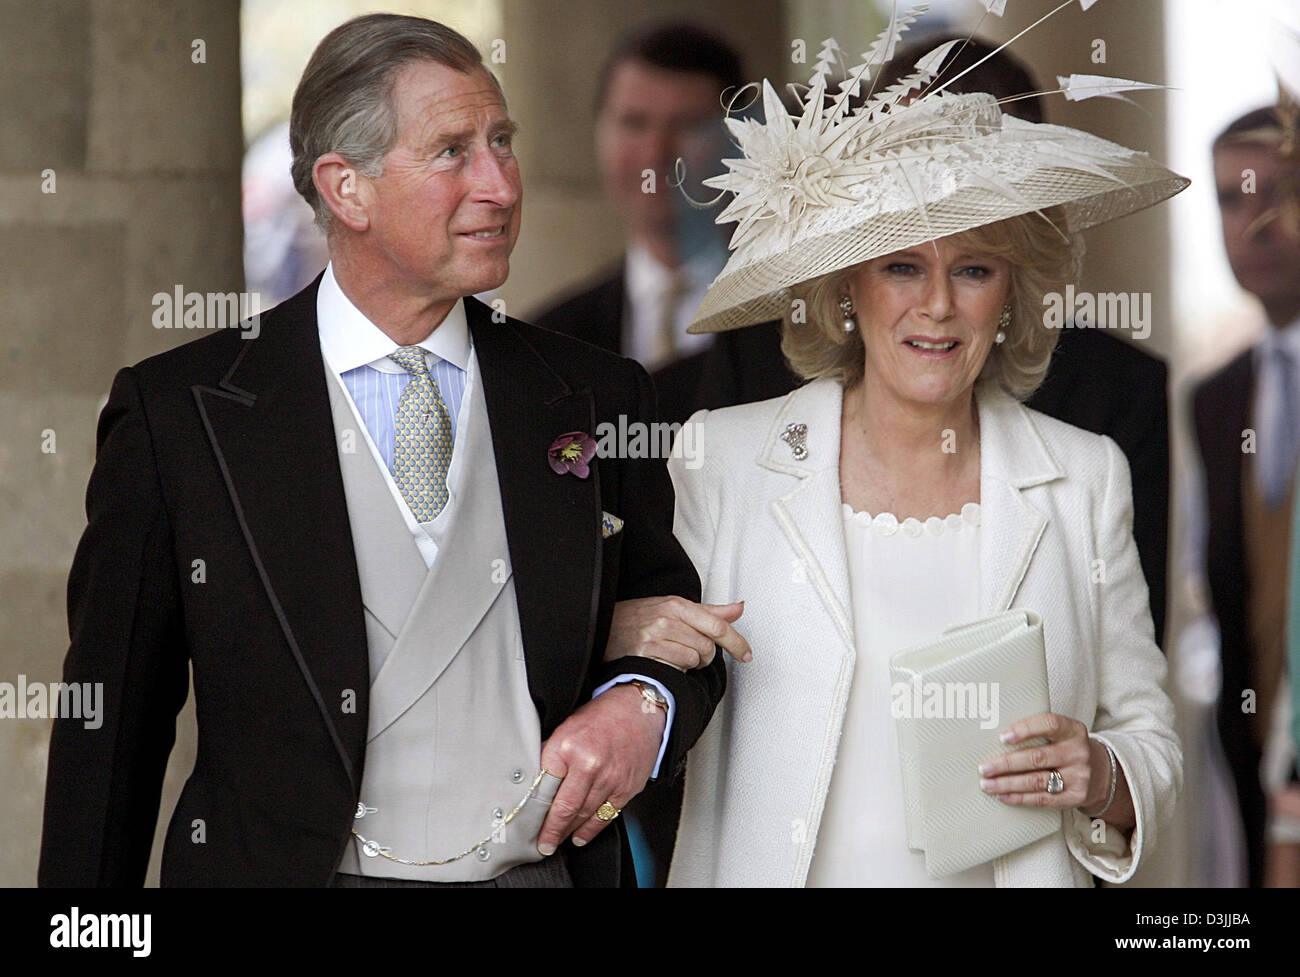 dpa-prince-charles-and-his-wife-camilla-parker-bowles-smile-as-they-D3JJBA.jpg